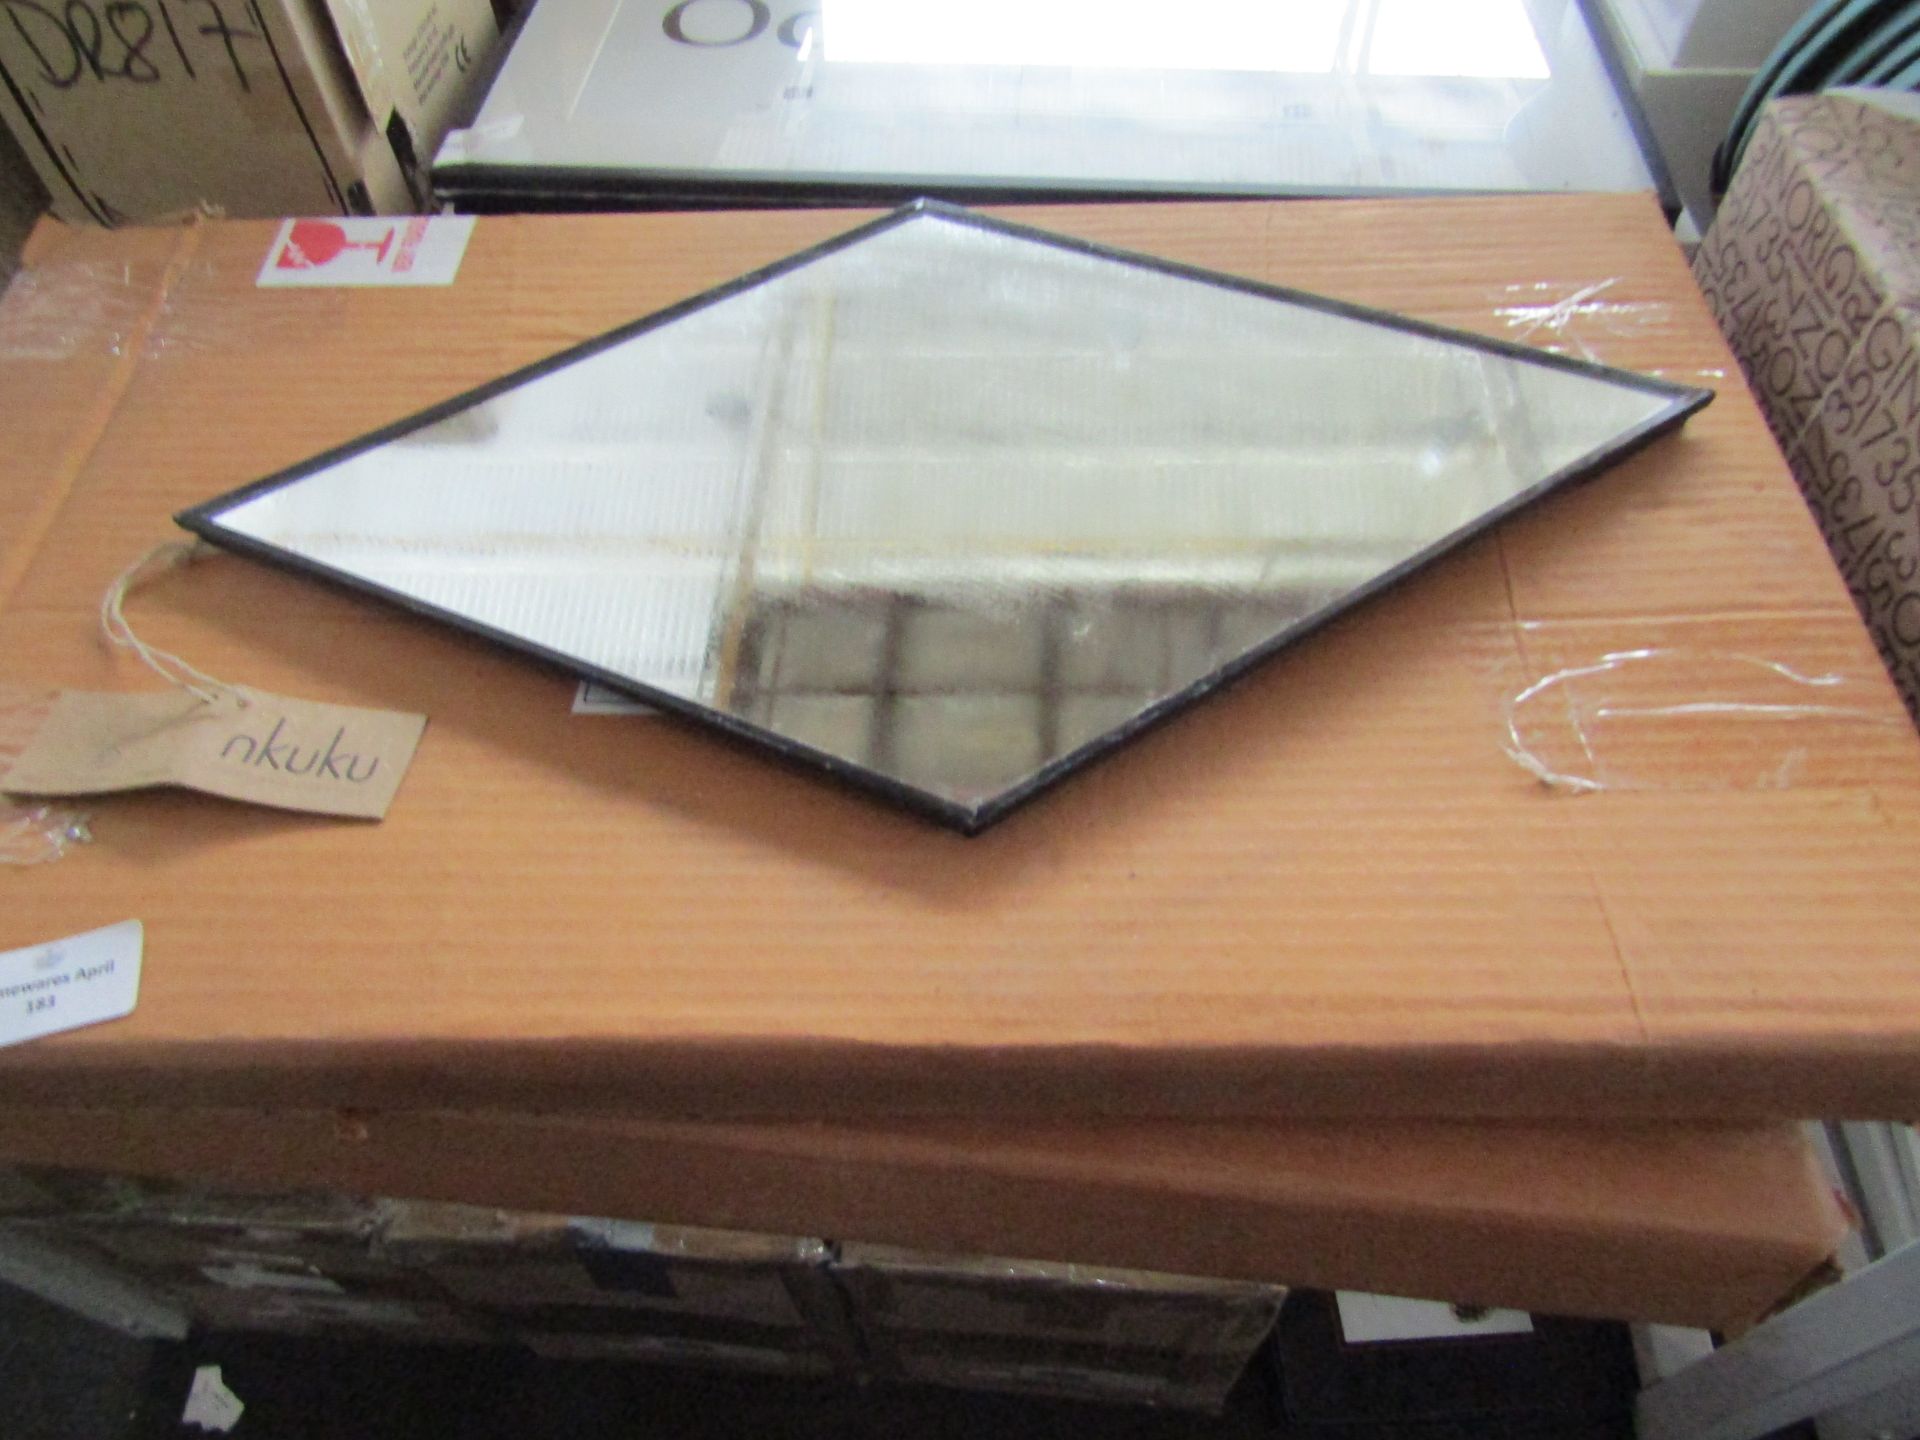 Set of 2 Black Framed Mirror - Large H39.5 x W23 x D0.5cm - New & Boxed. (209)